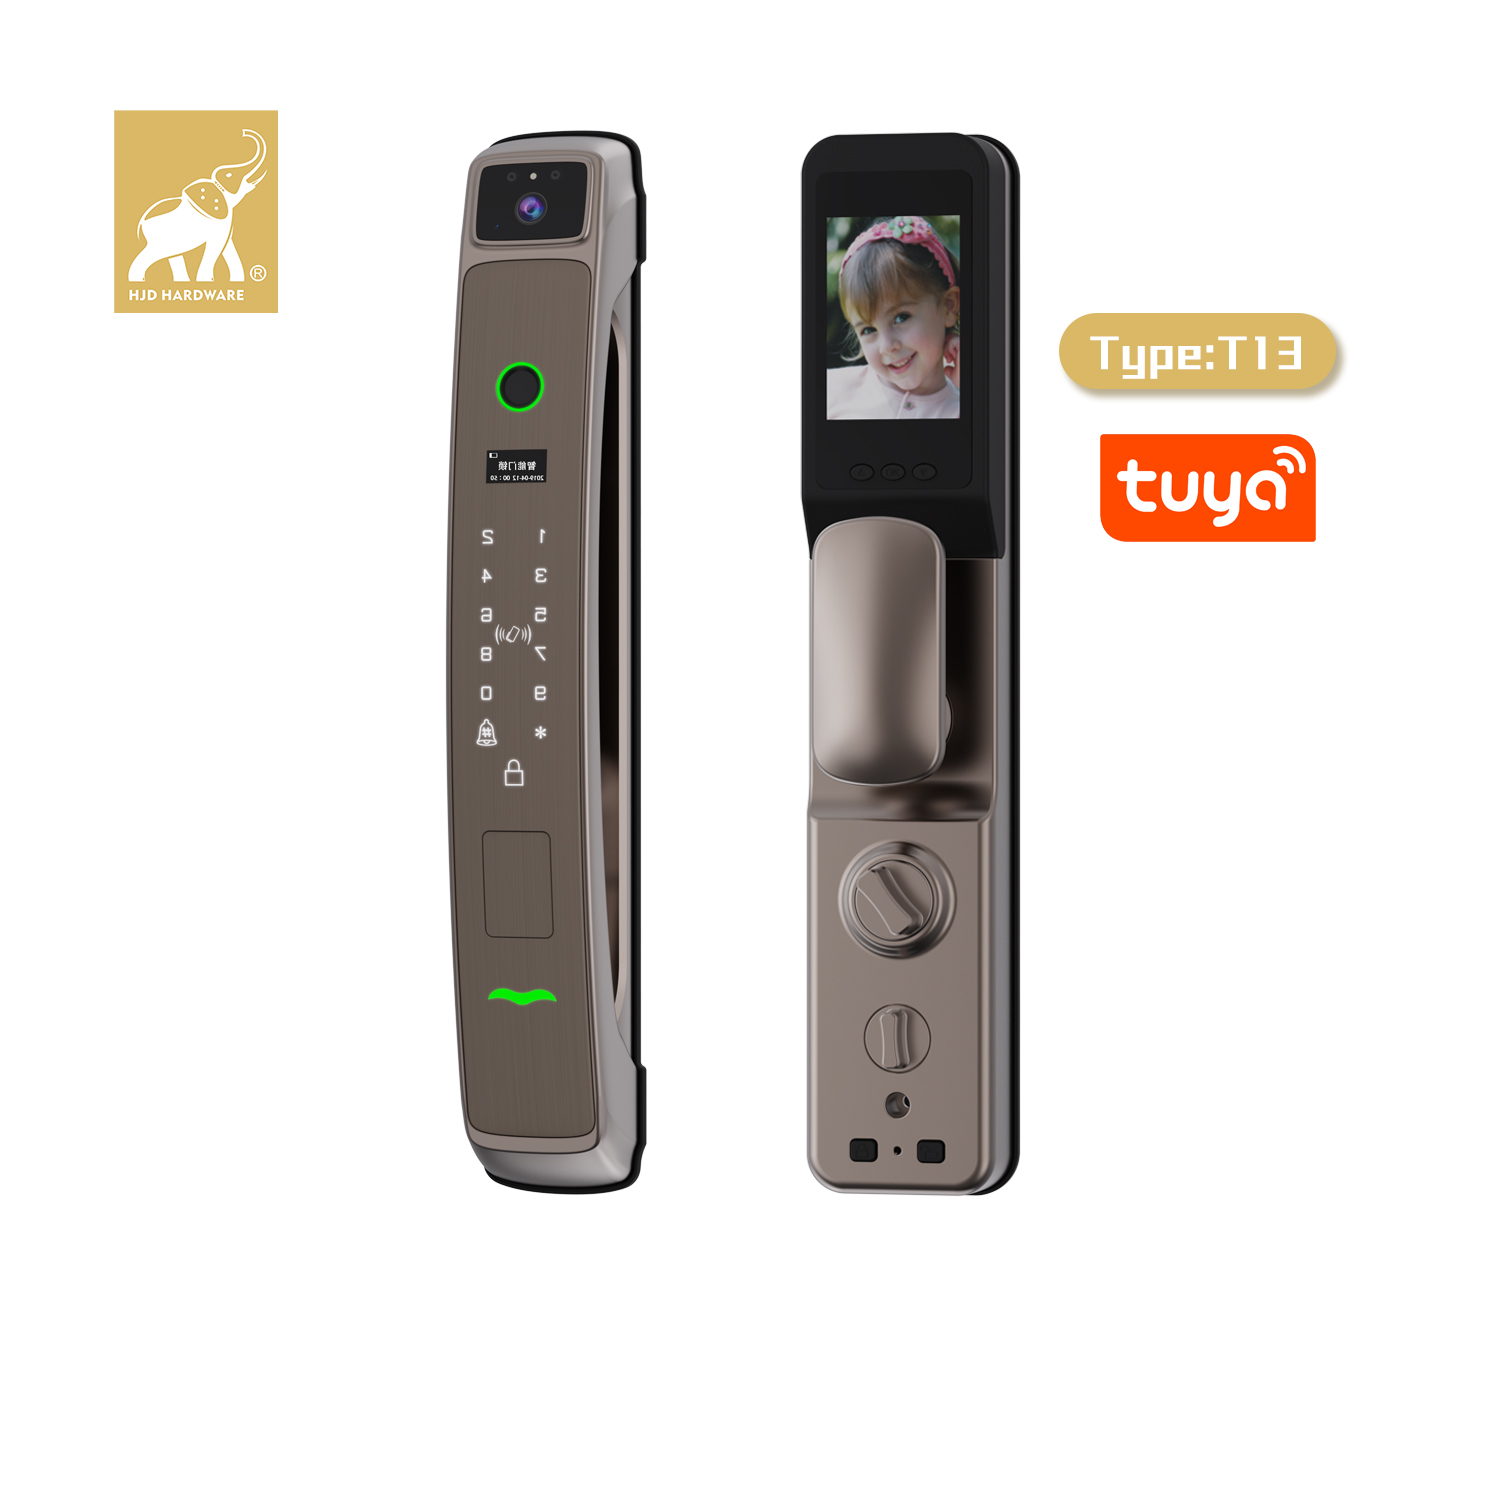 T13 Fully automatic smart lock